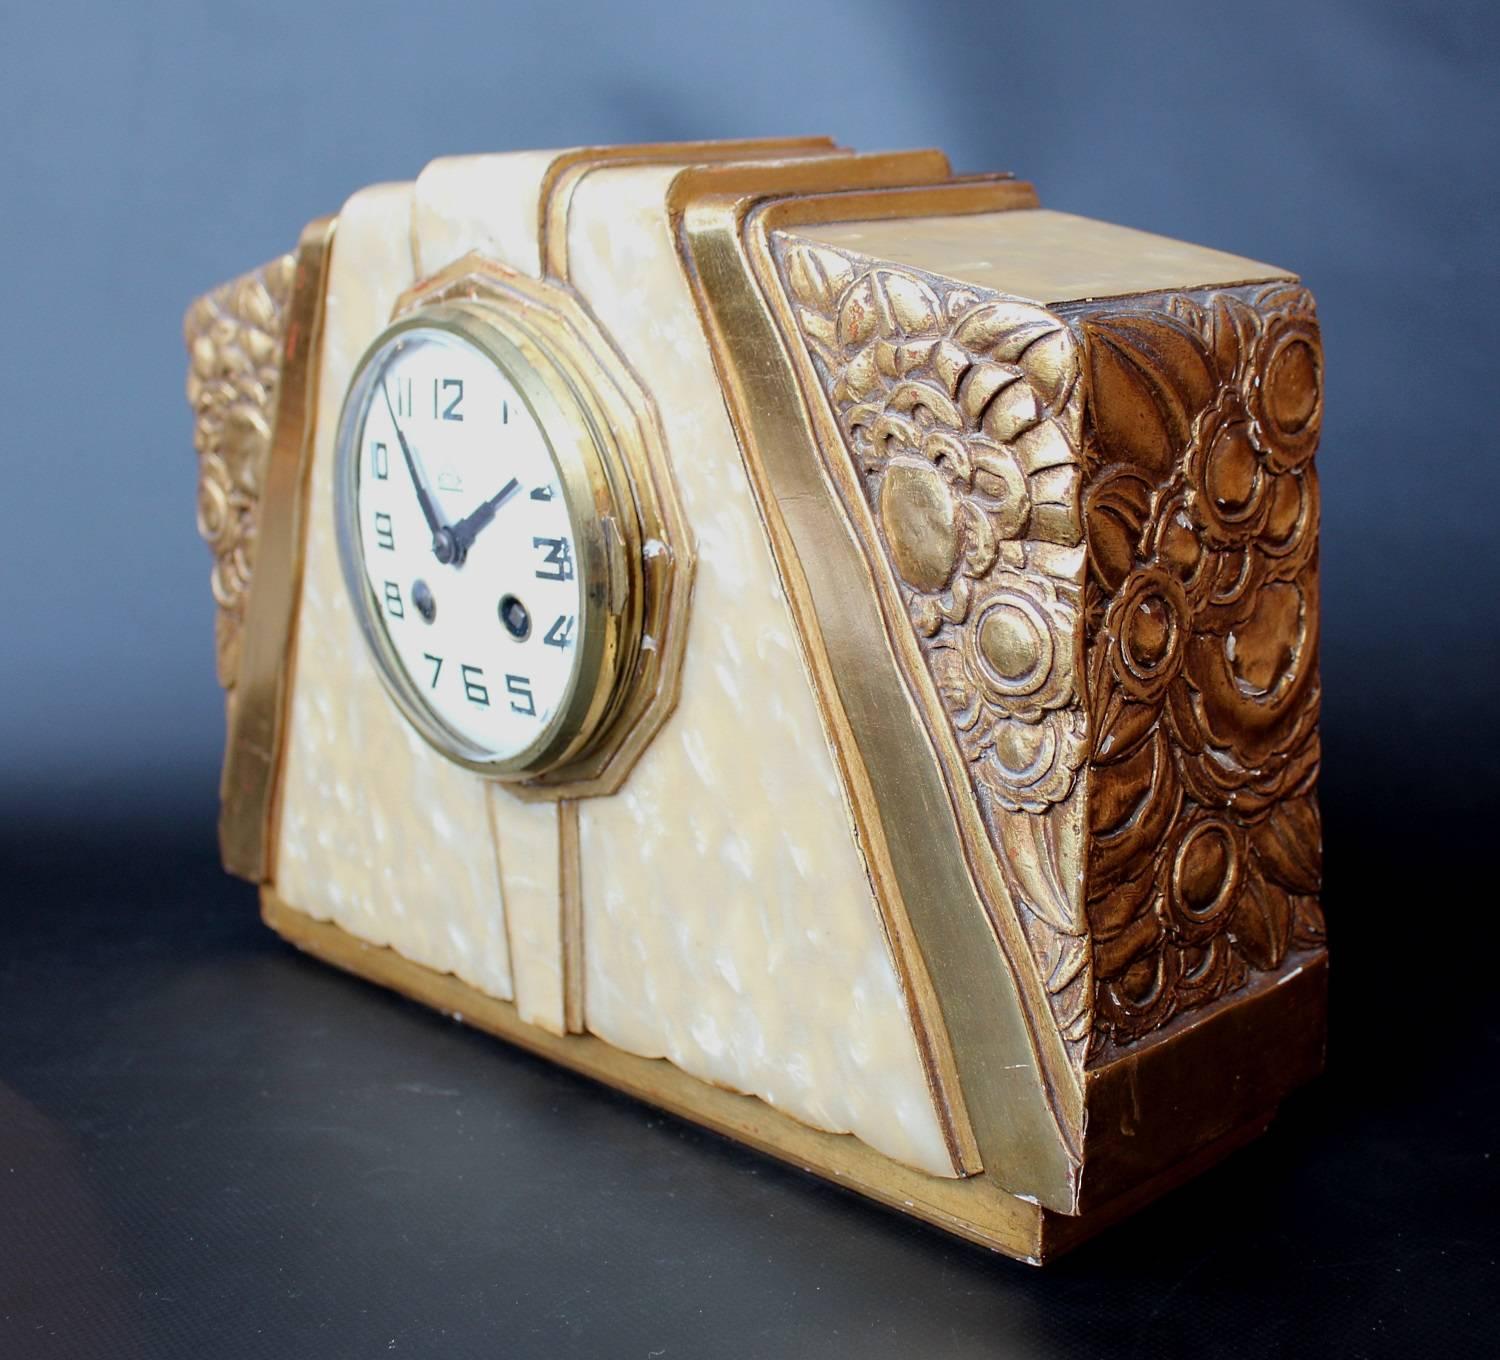 Gilt Art Deco Mantel Clock Attributed to Süe et Mare 8 Day Movement French circa 1925